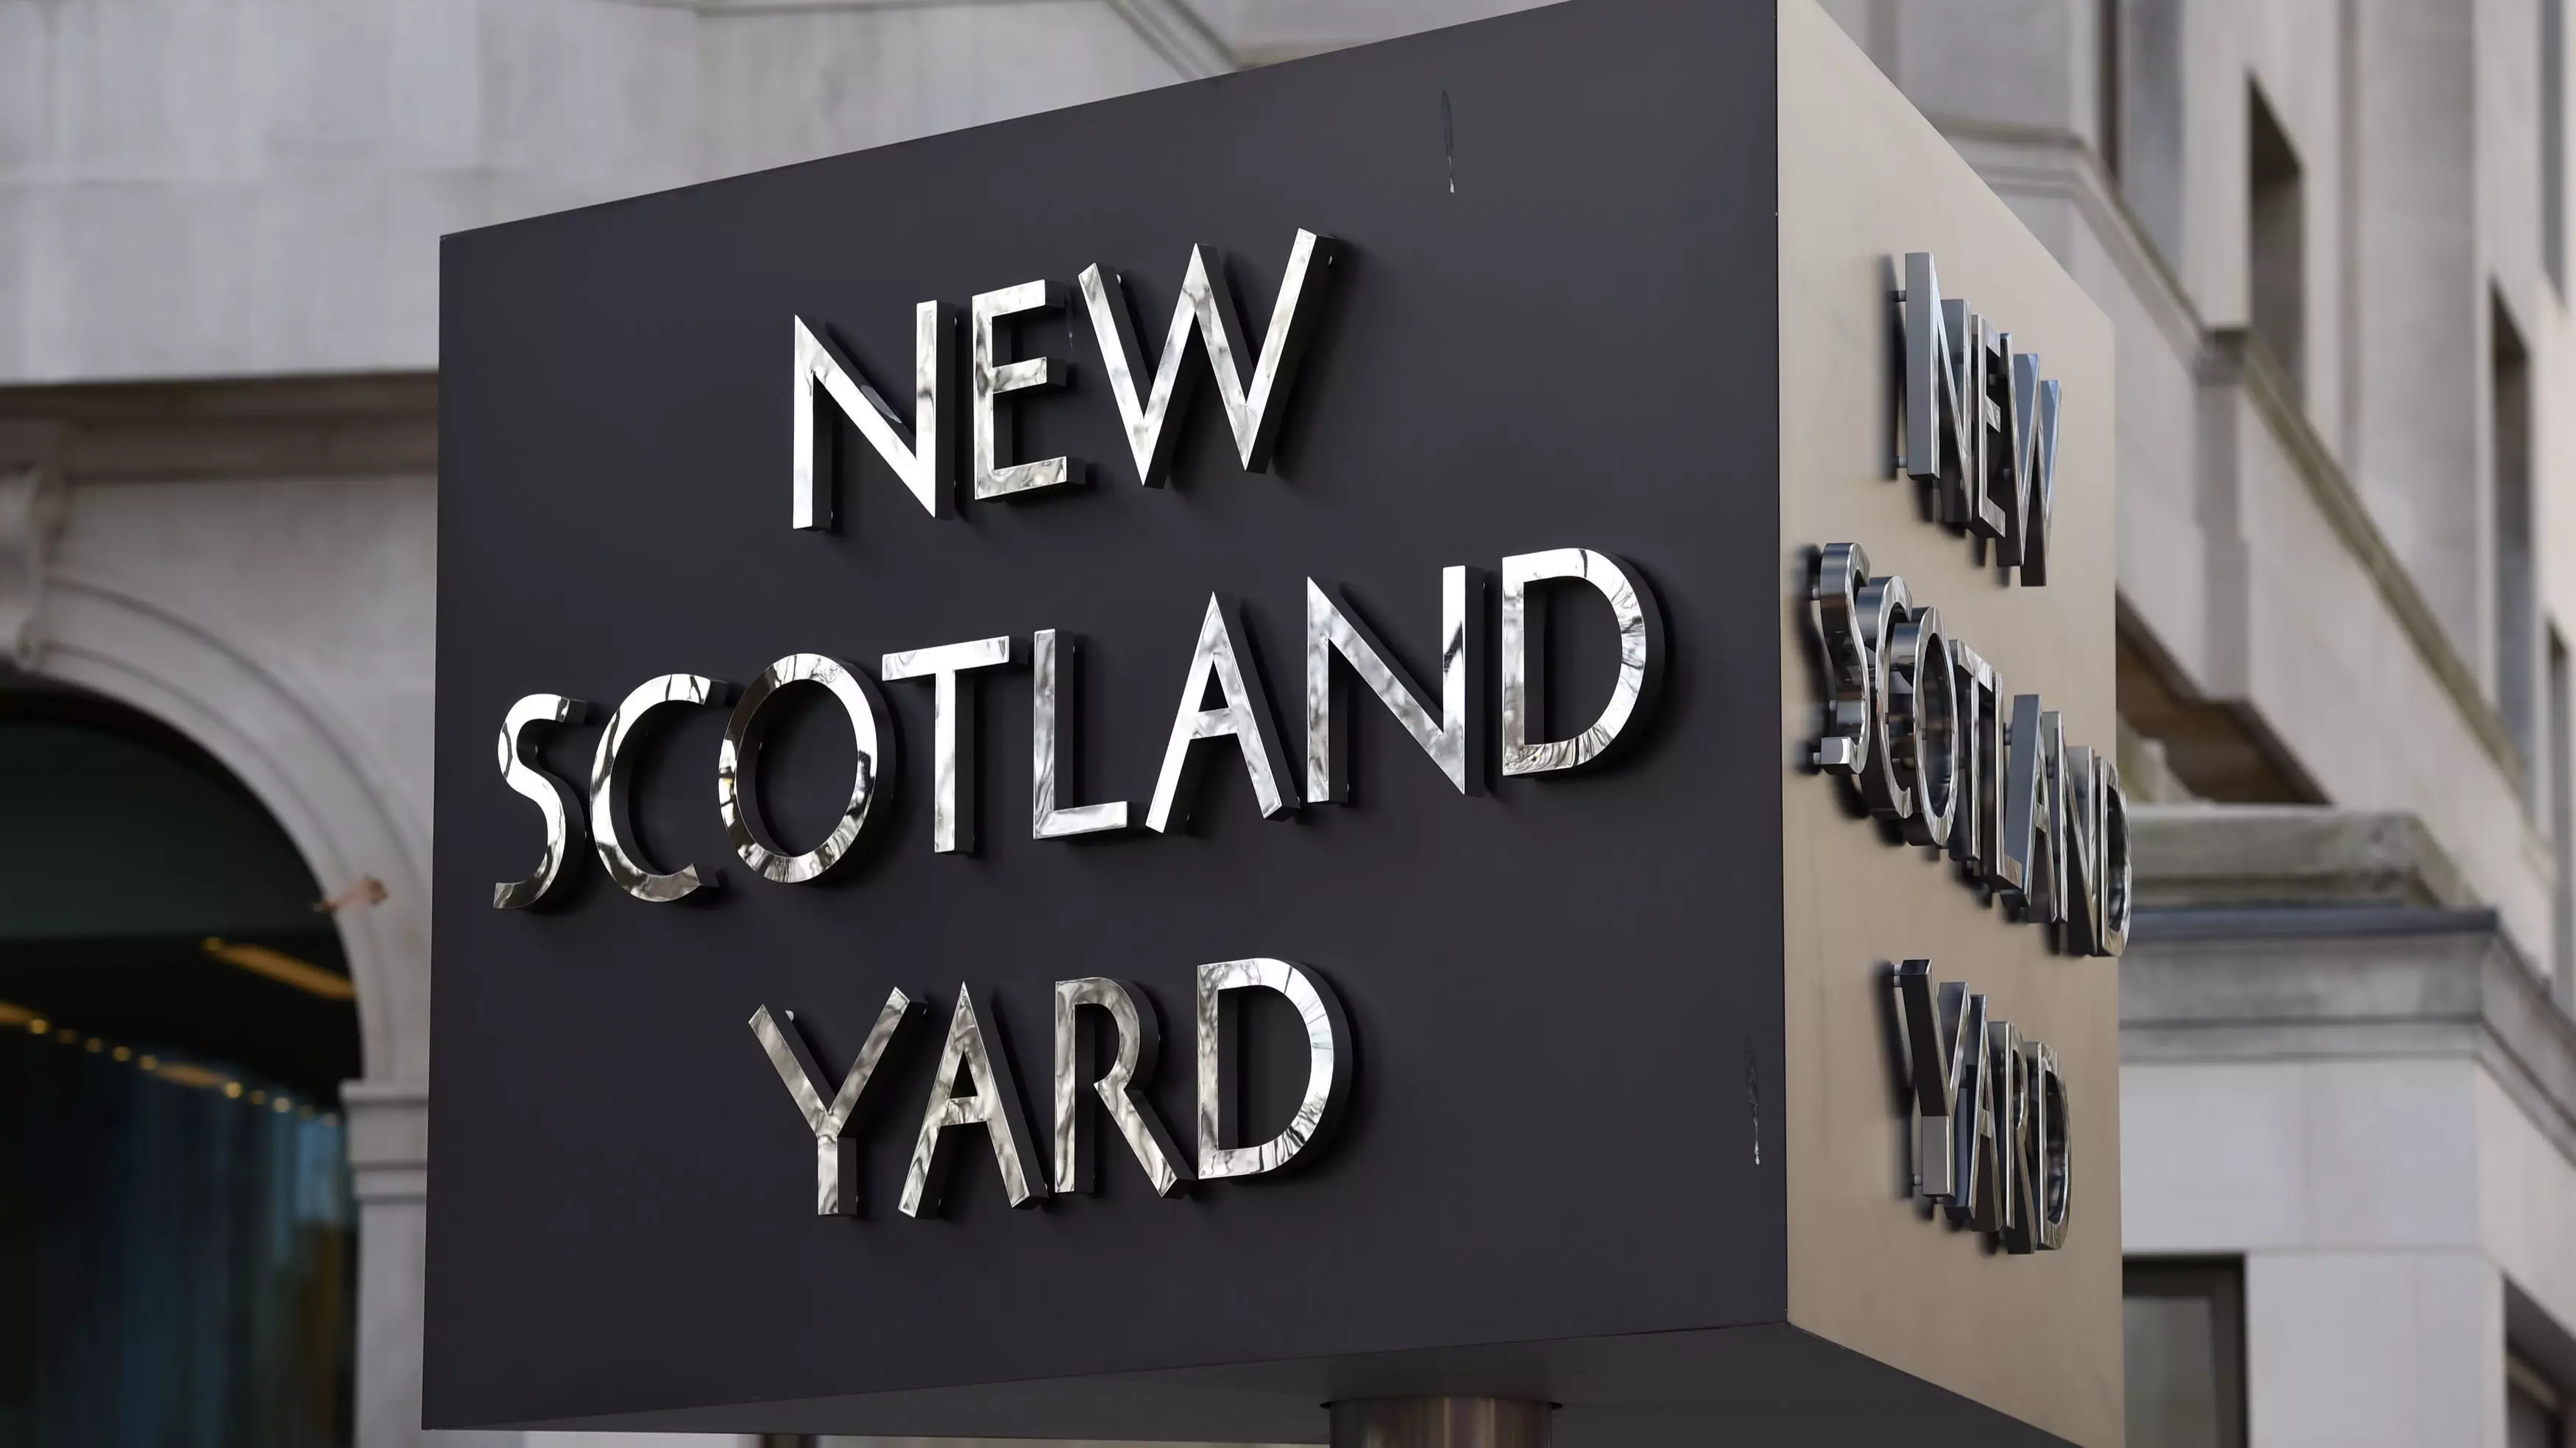 Four Men Have Been Stabbed To Death In London During NYE Celebrations